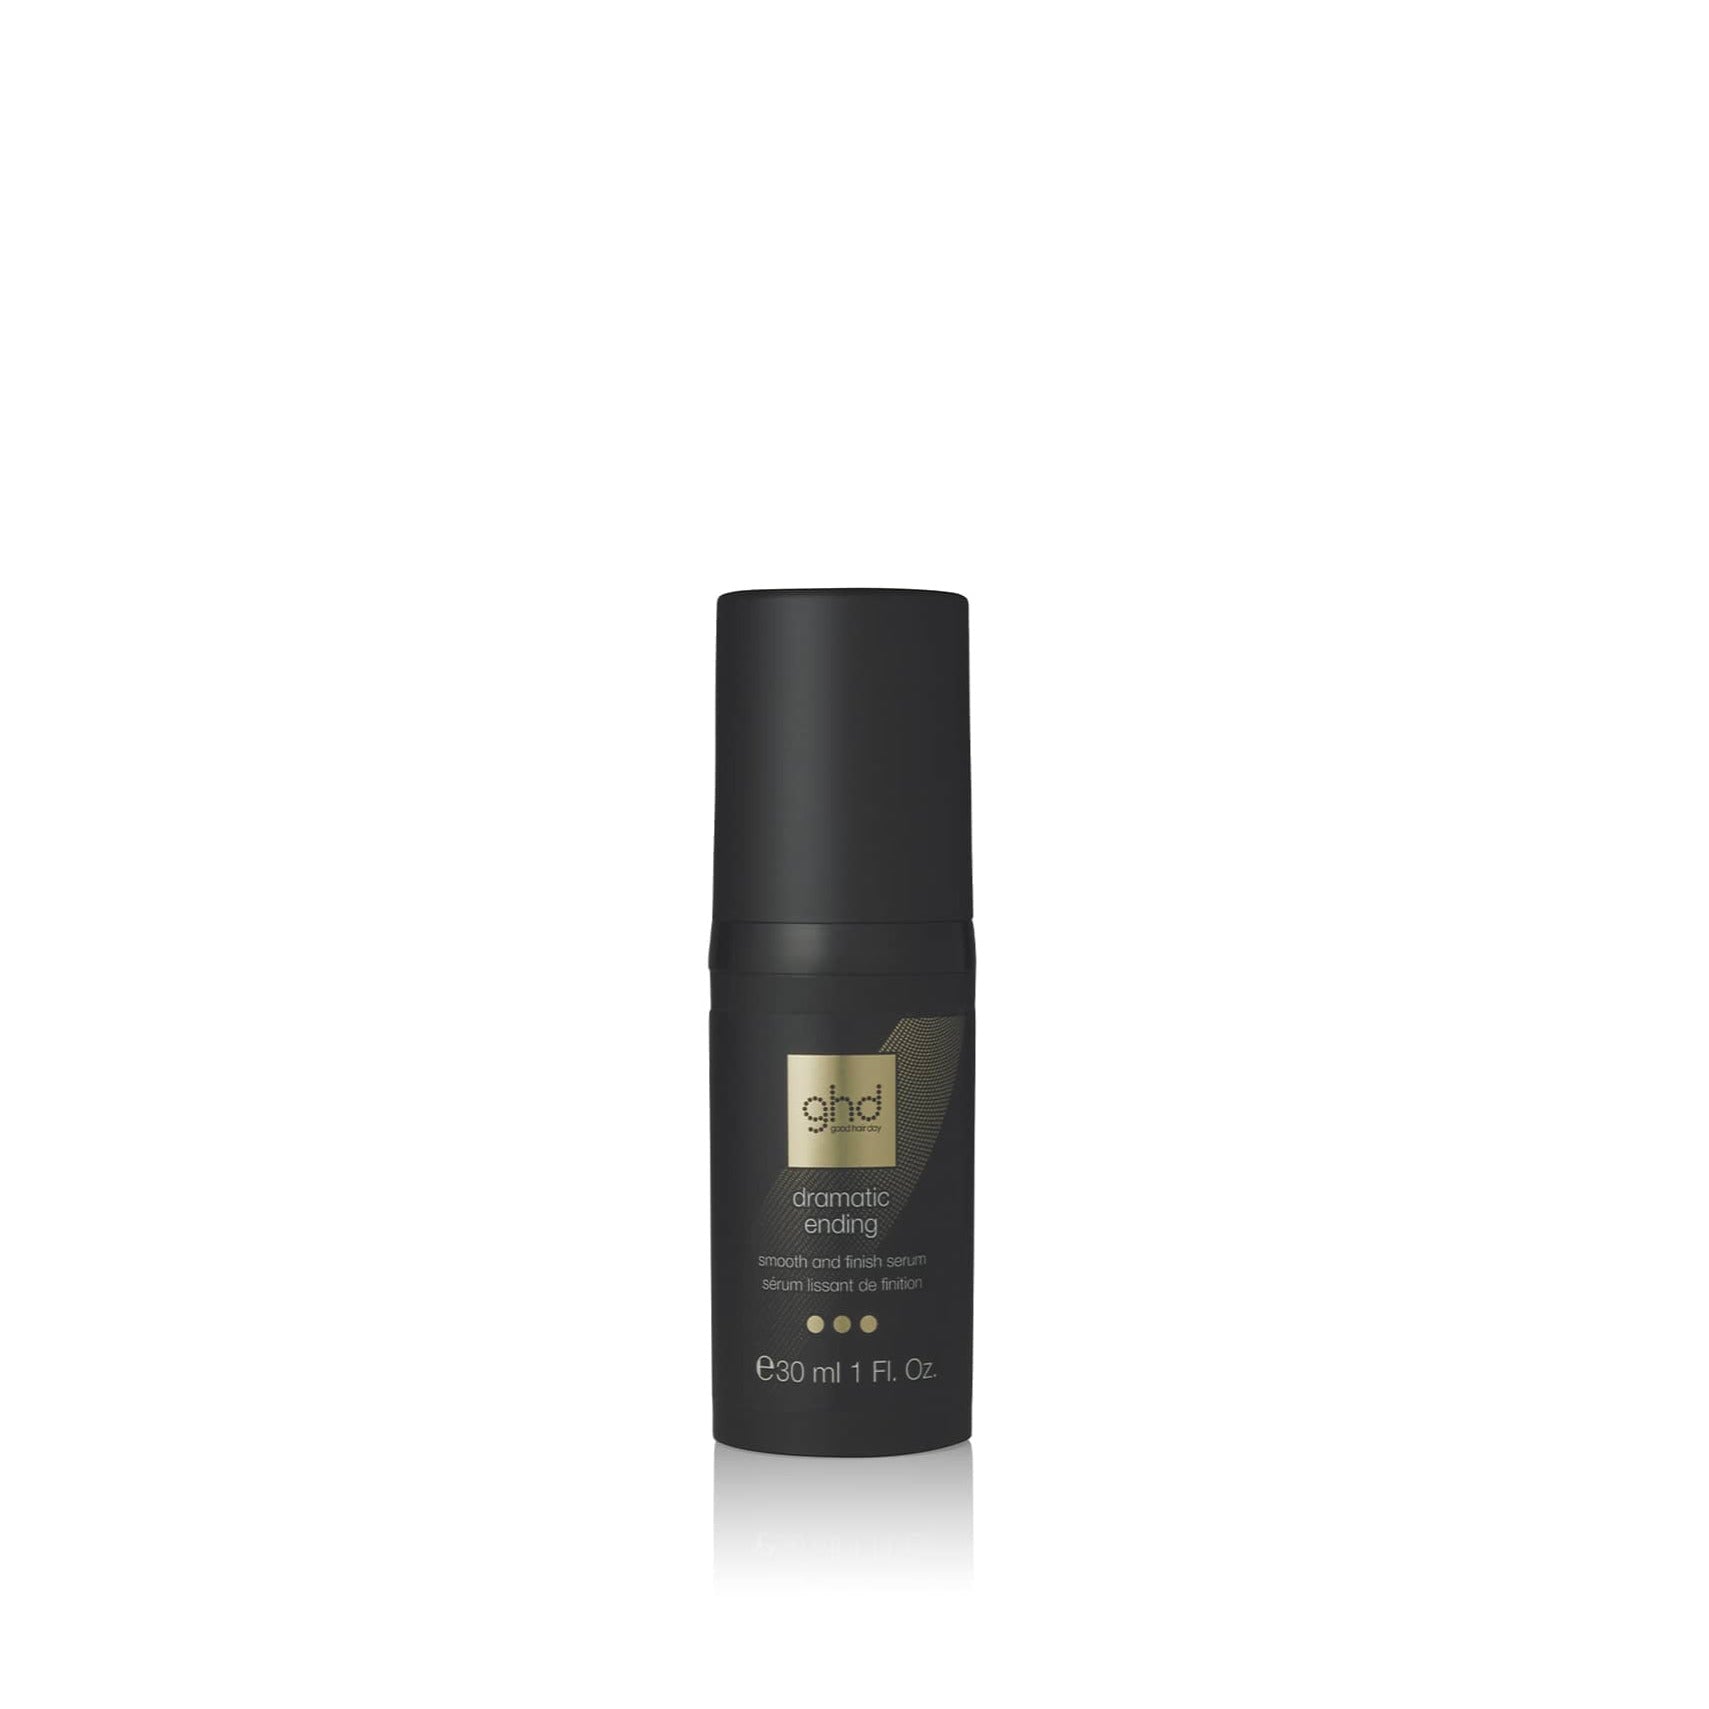 ghd dramatic ending - smooth and finish serum